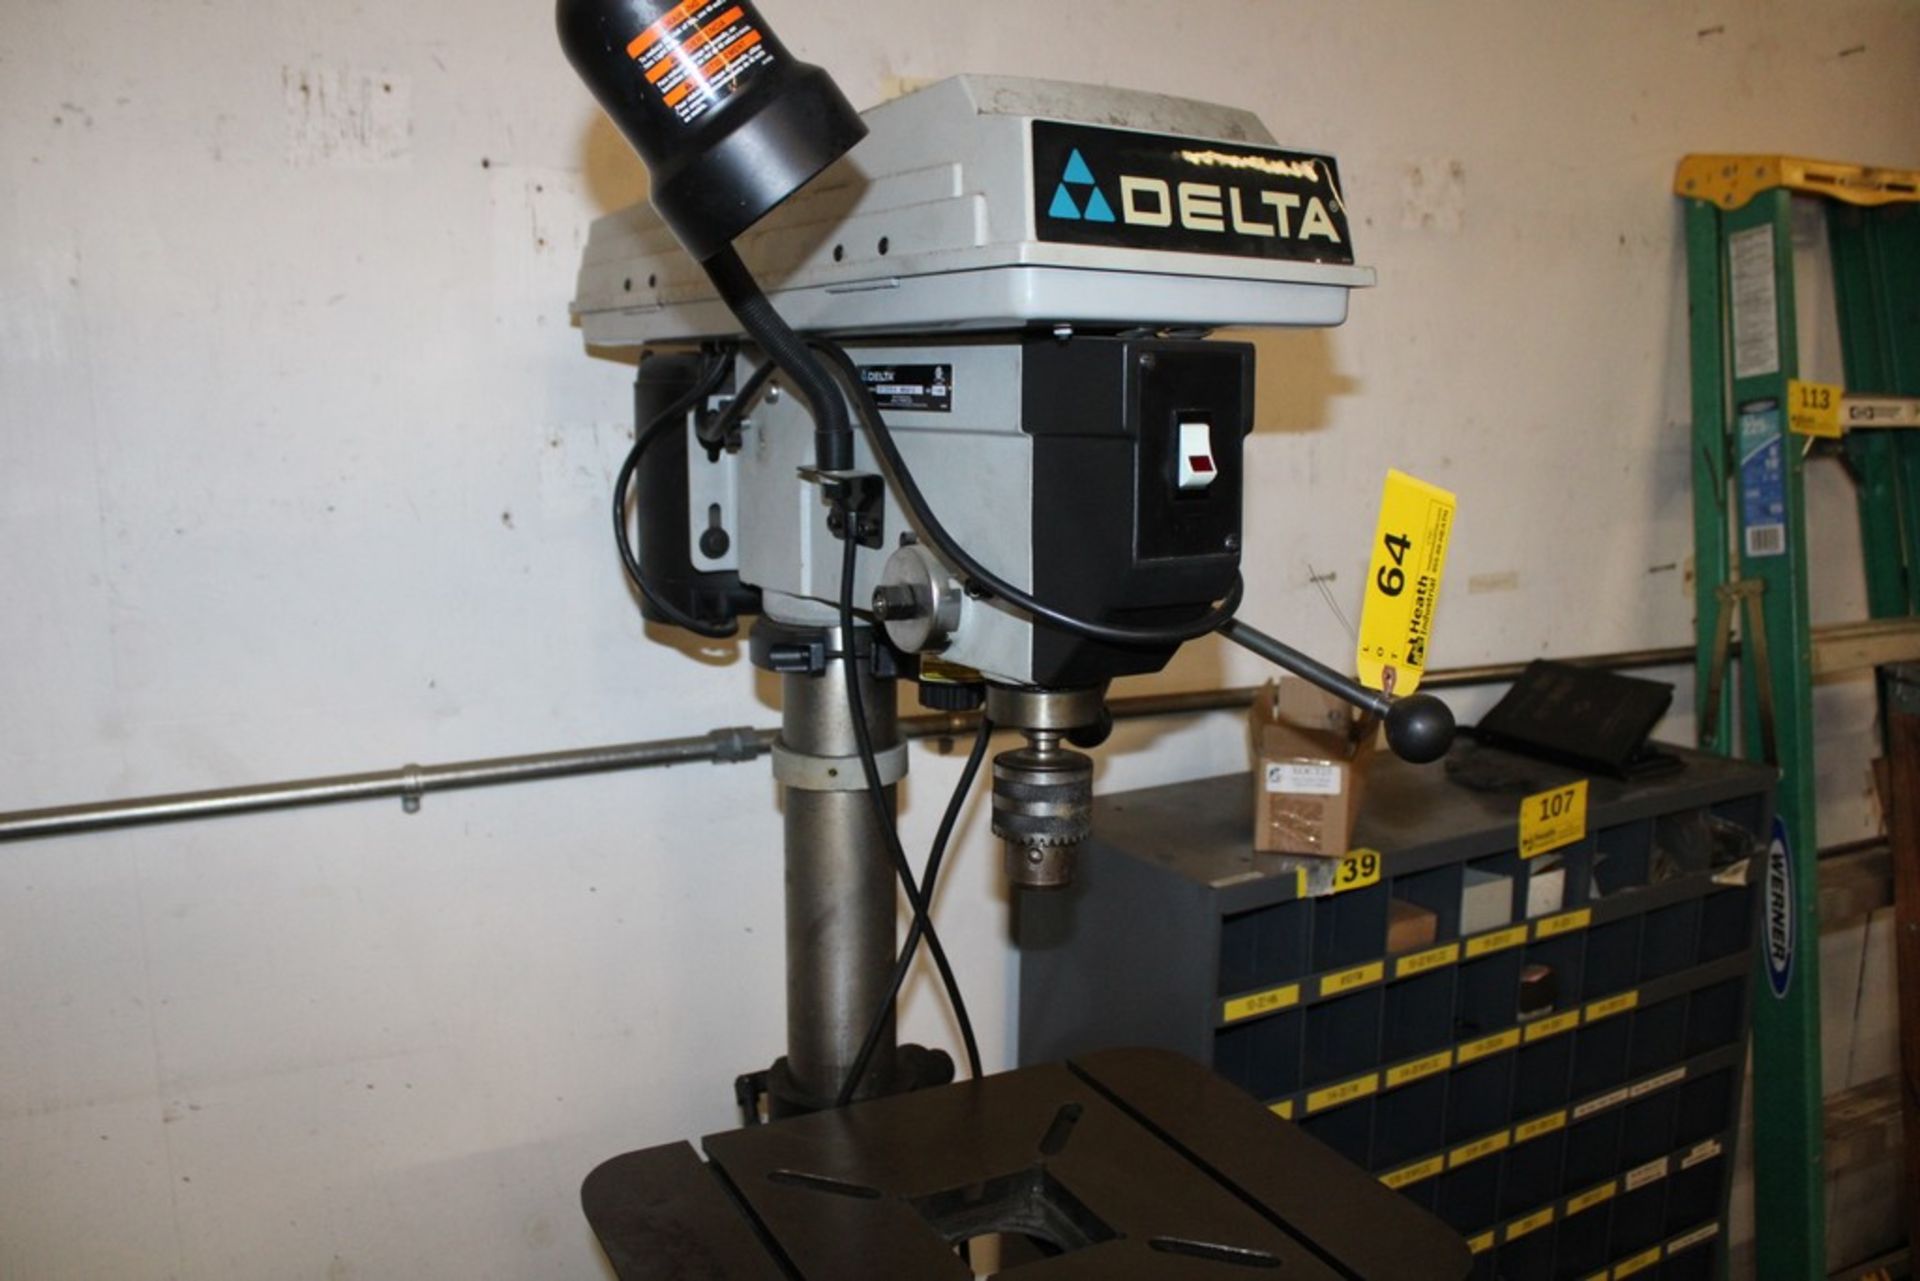 DELTA MODEL 17-950L 16-1/2" FLOOR STANDING DRILL PRESS, 14" X 18" SLOTTED TABLE, WORK LIGHT - Image 2 of 5